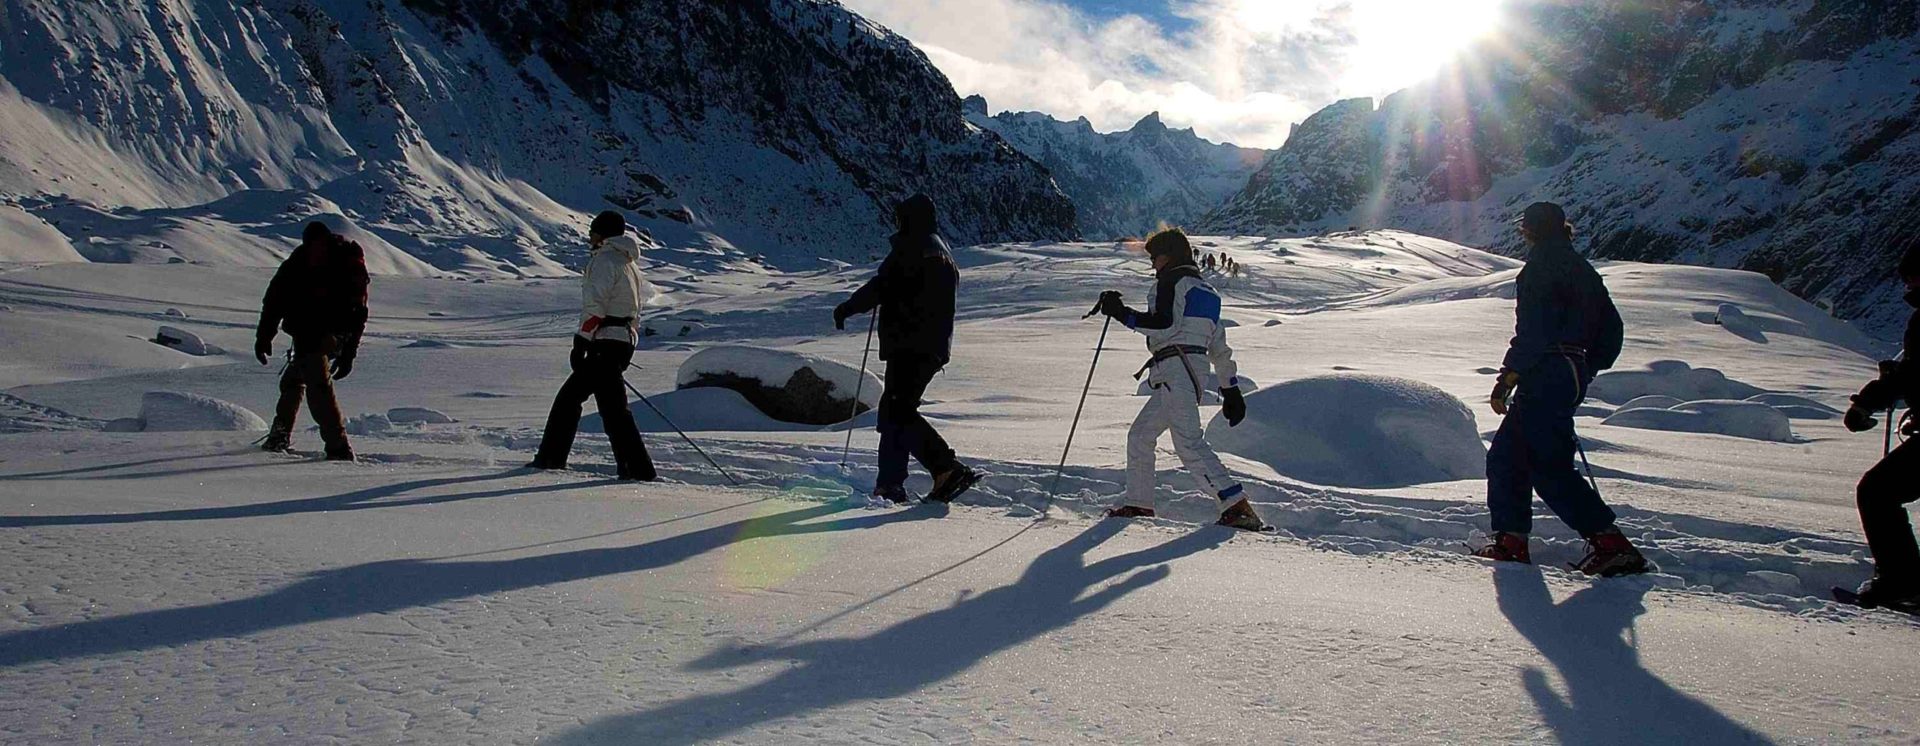 Snowshoeing on the Mer de Glace – 1913 m